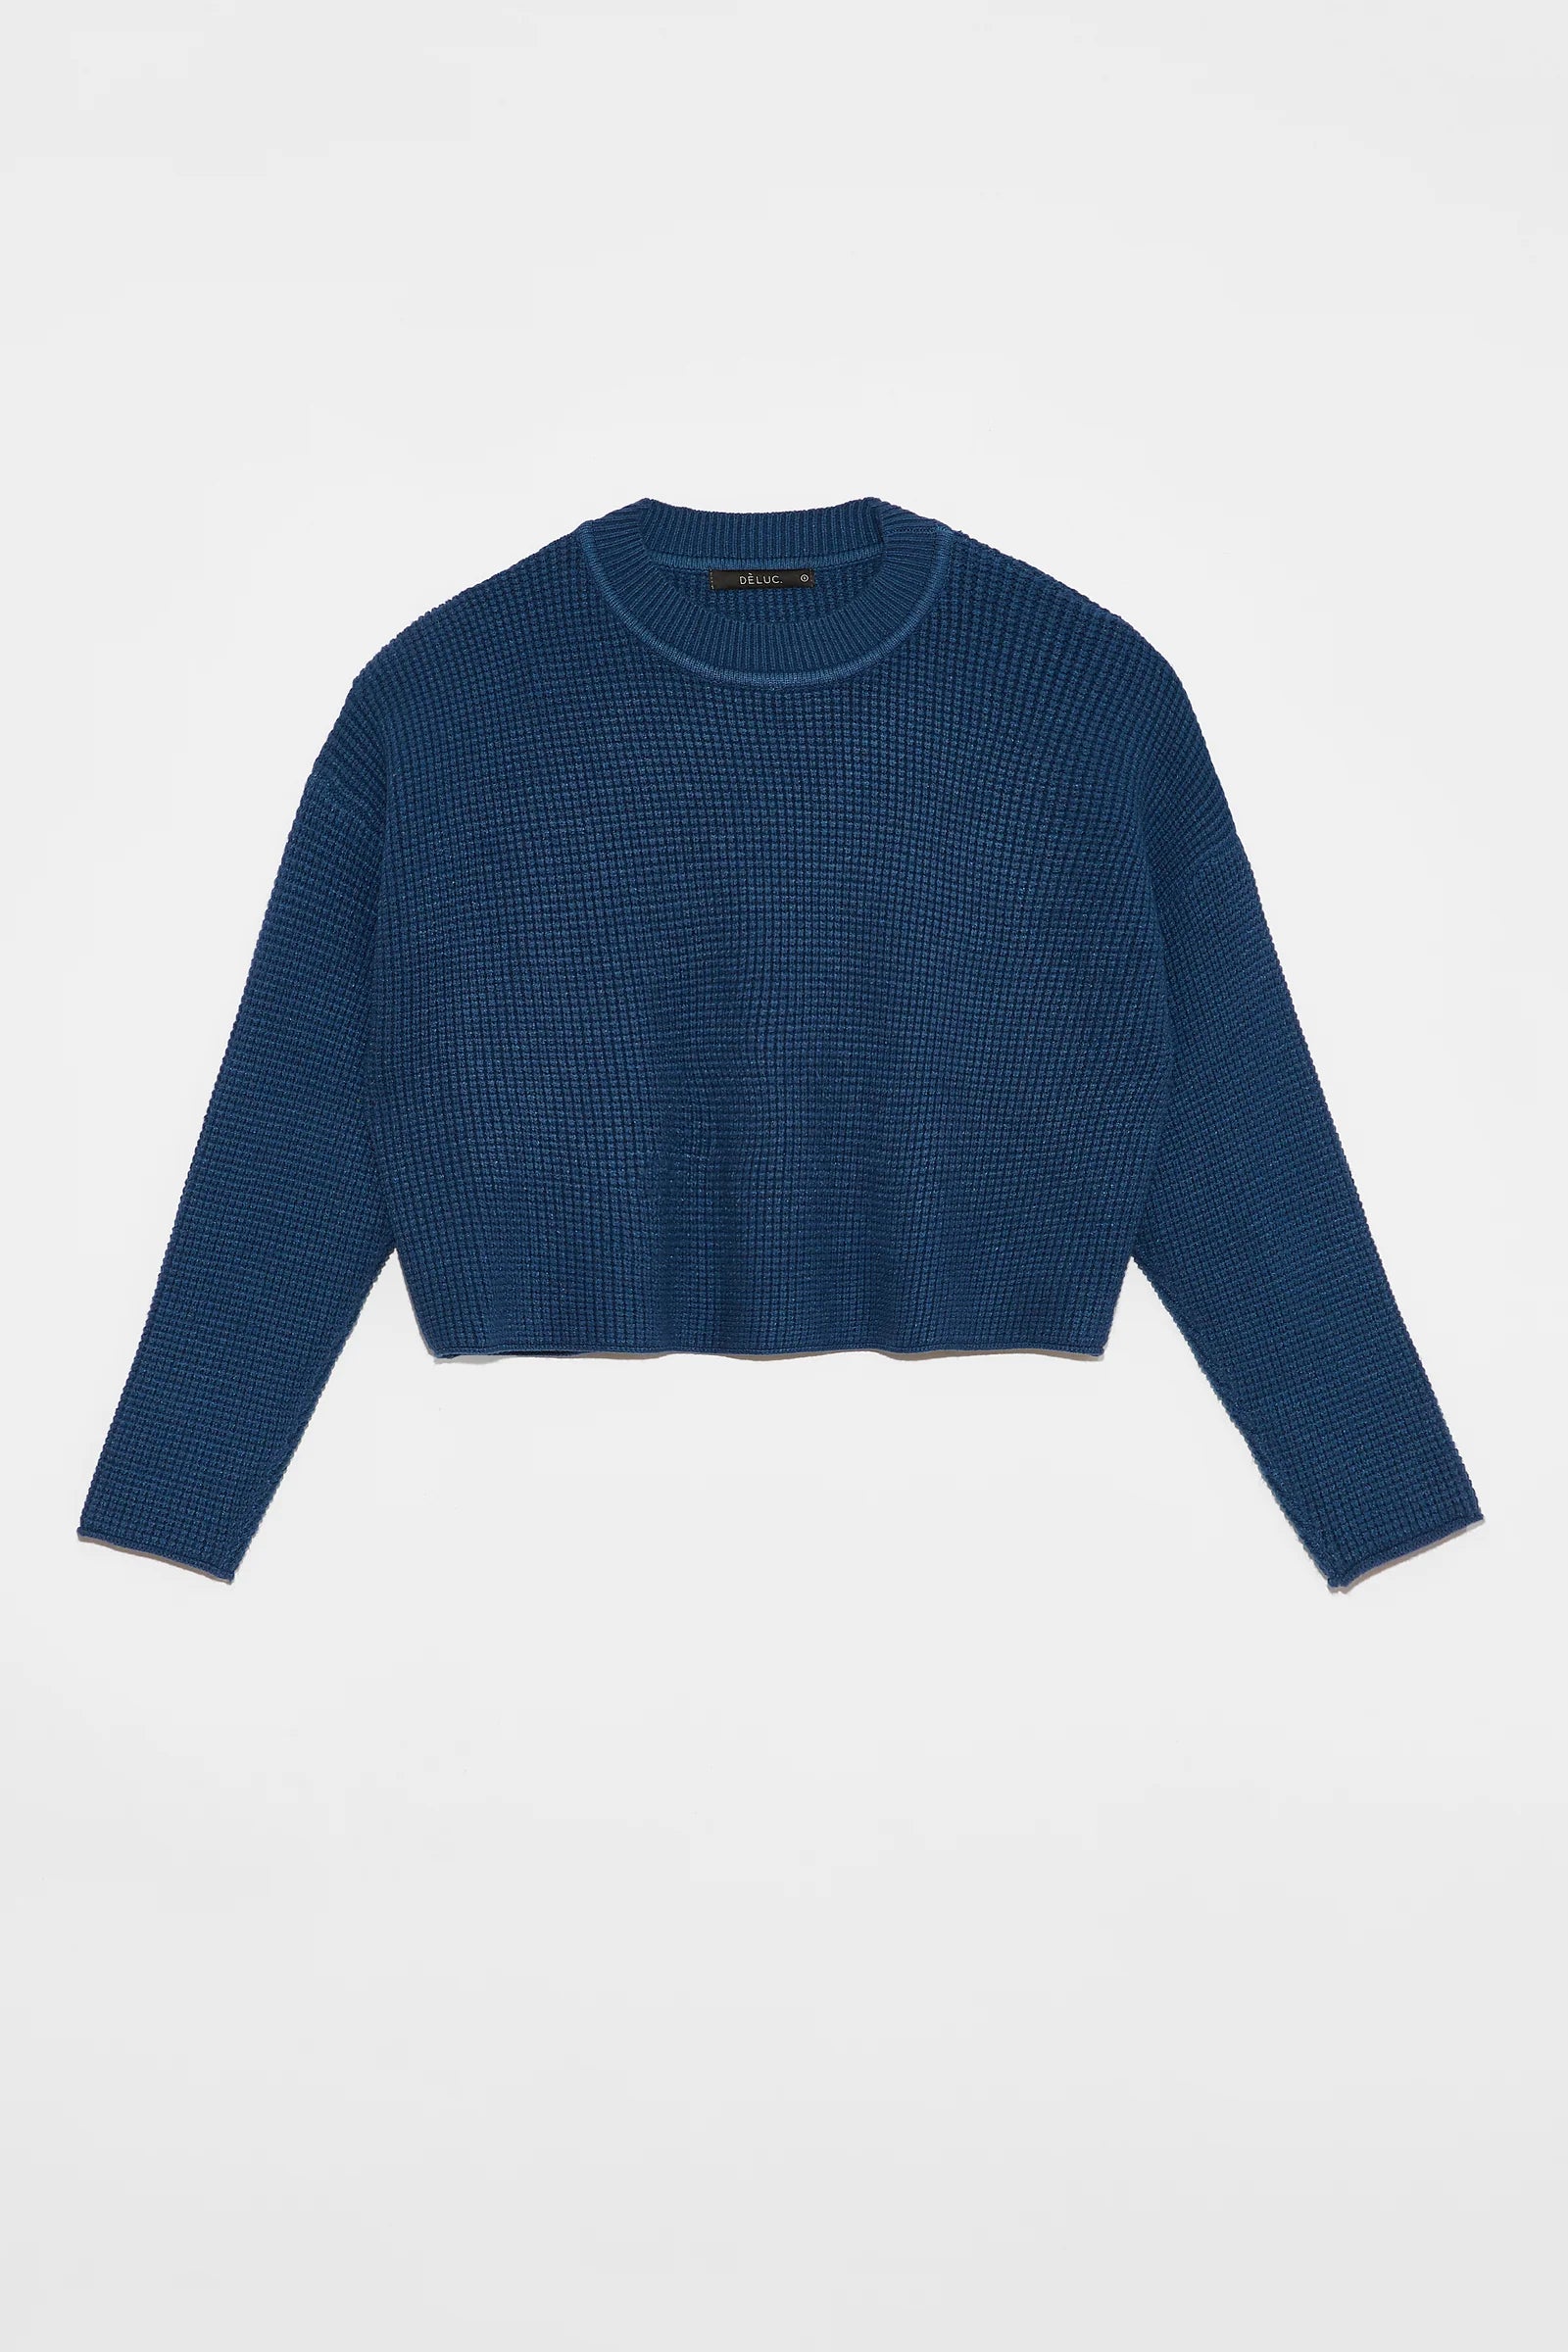 STOOGEES SWEATER/ YALE BLUE